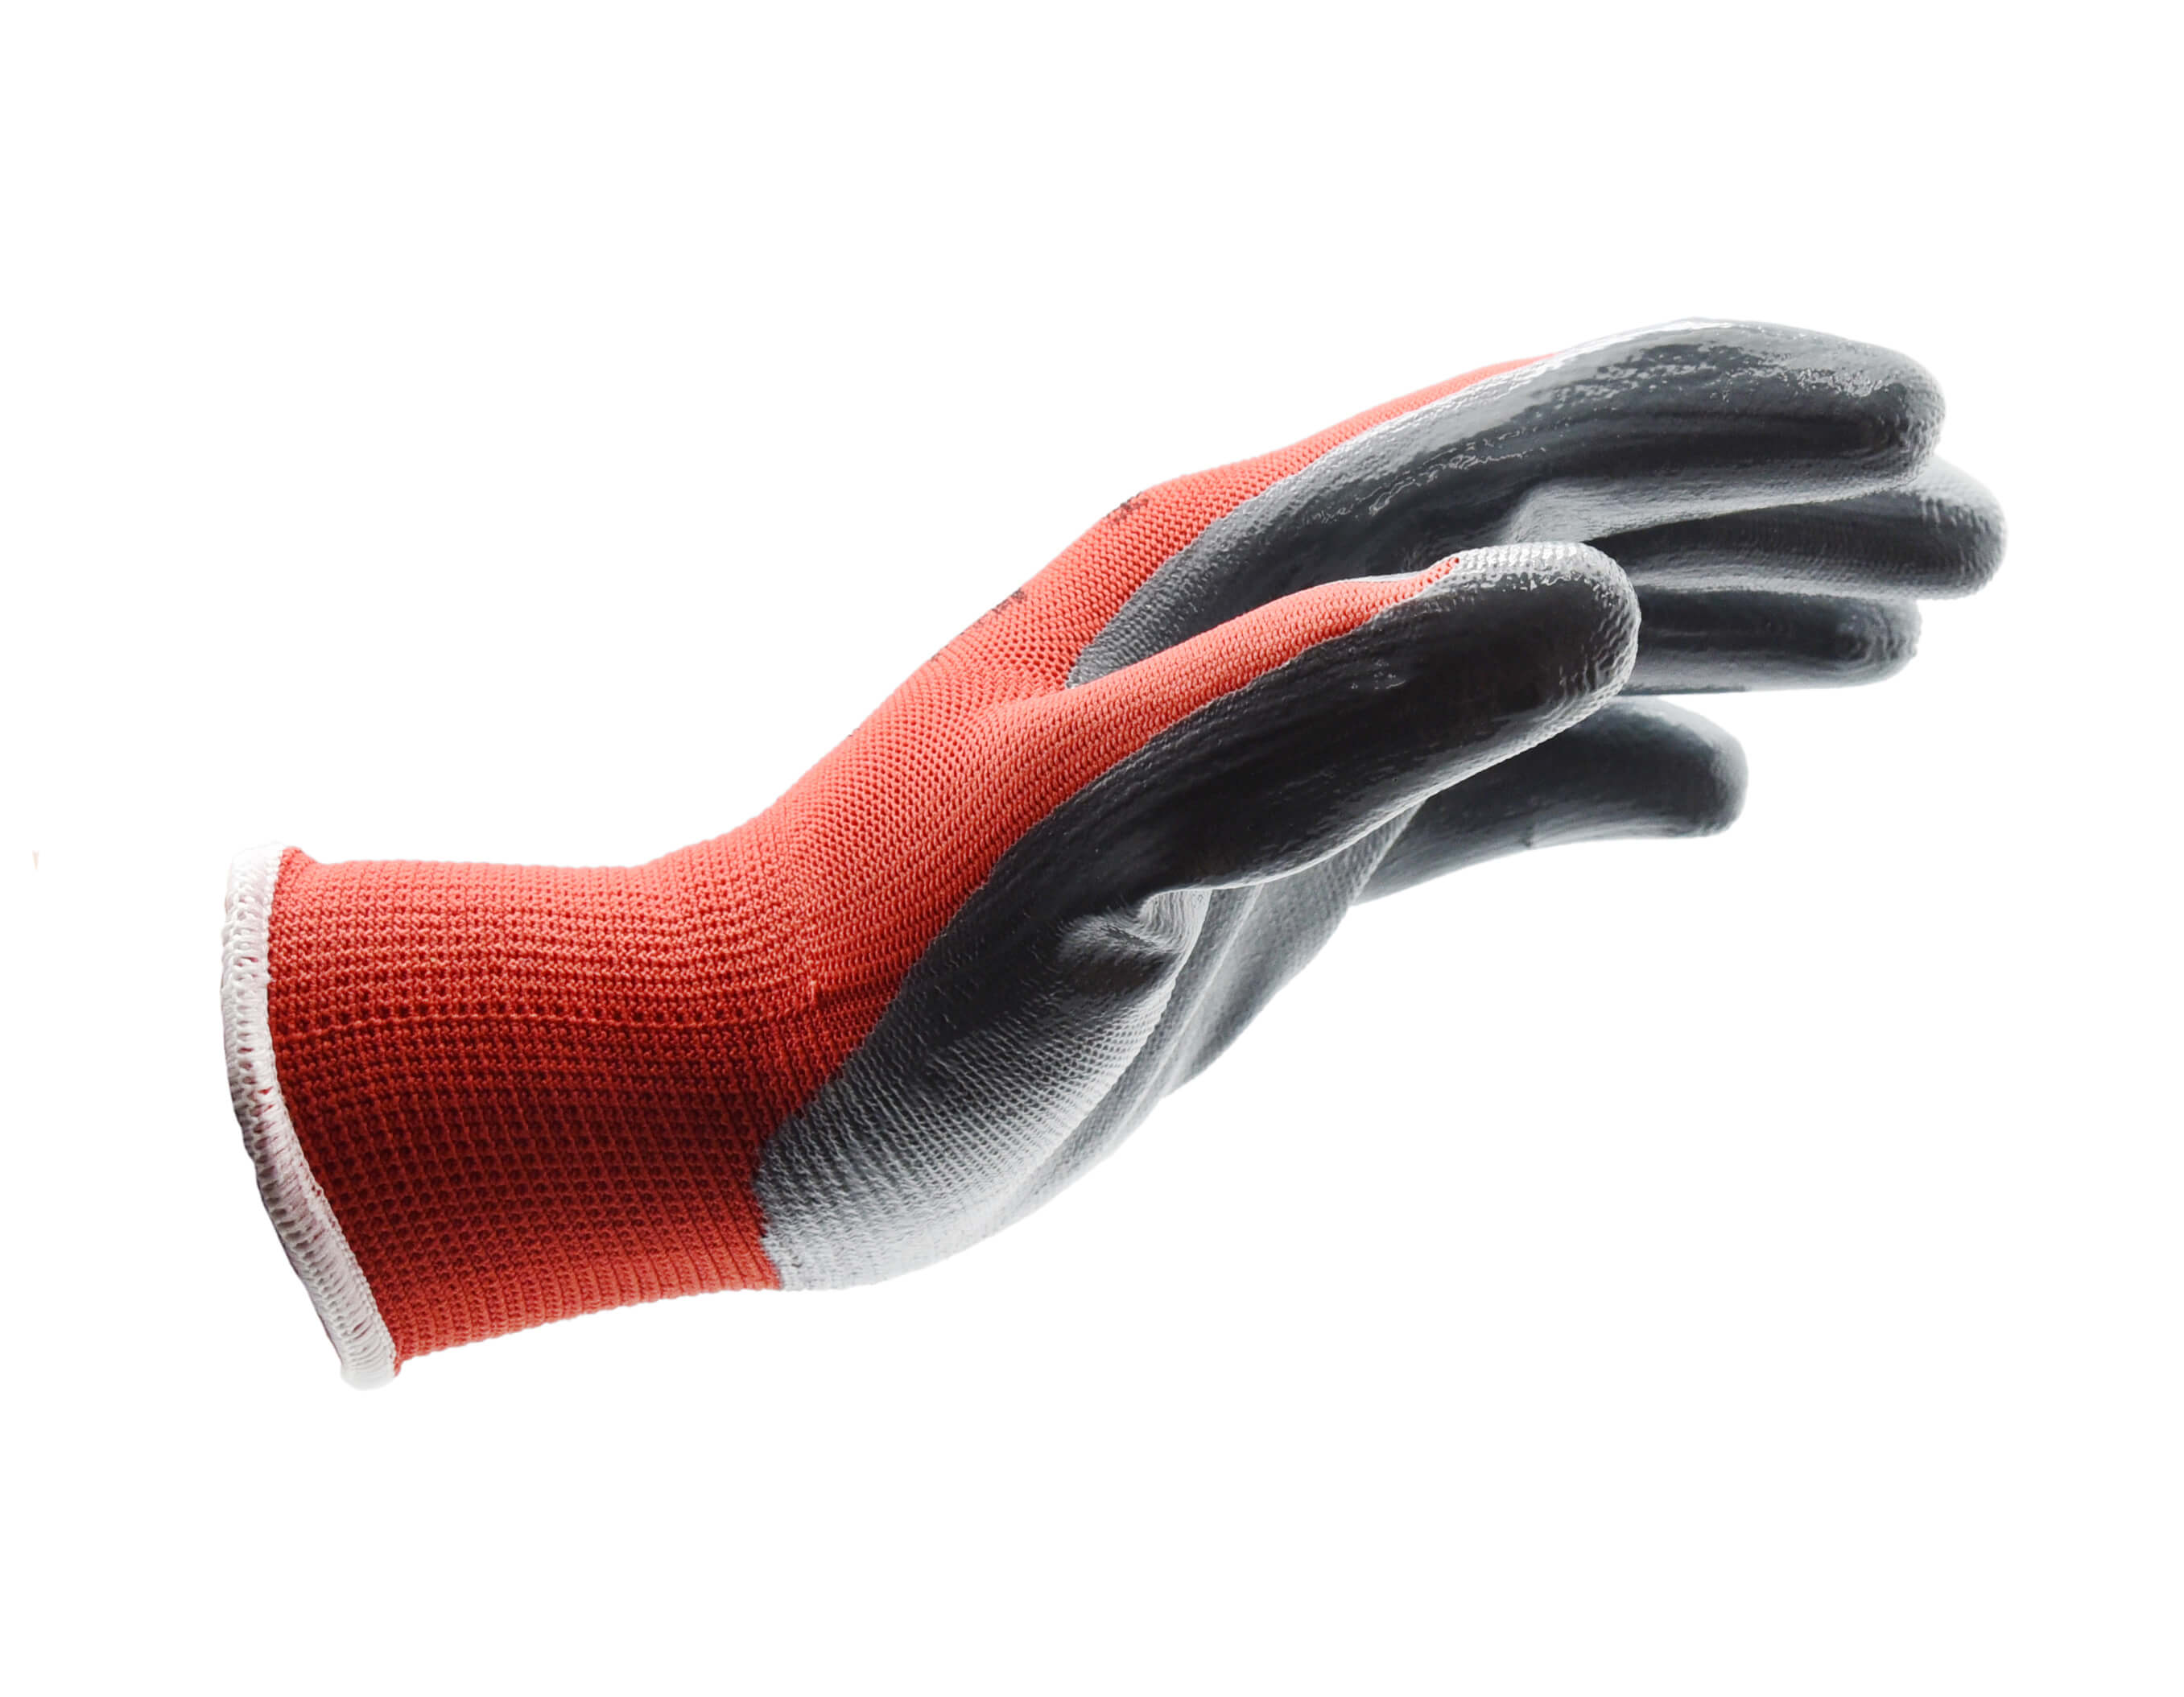 GREY SMOOTH NITRILE PALM RED POLYESTER GLOVE SZ 7